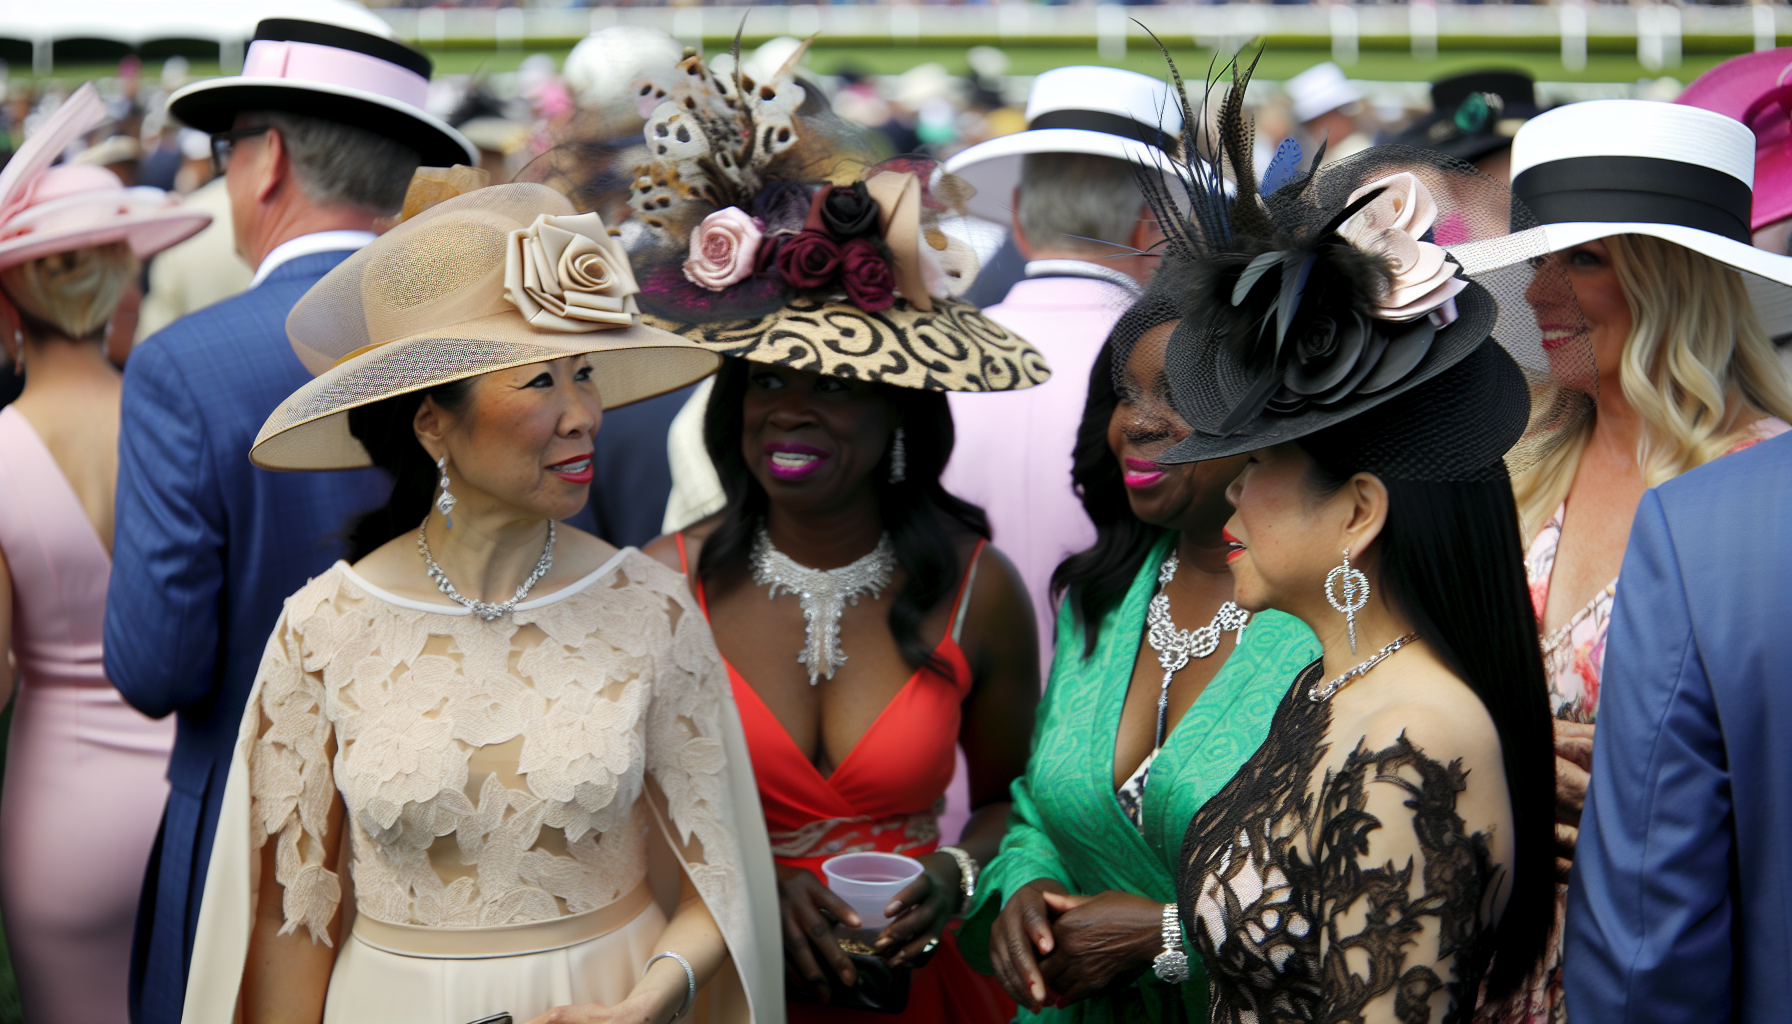 Women wearing dress hats at a horse racing derby event